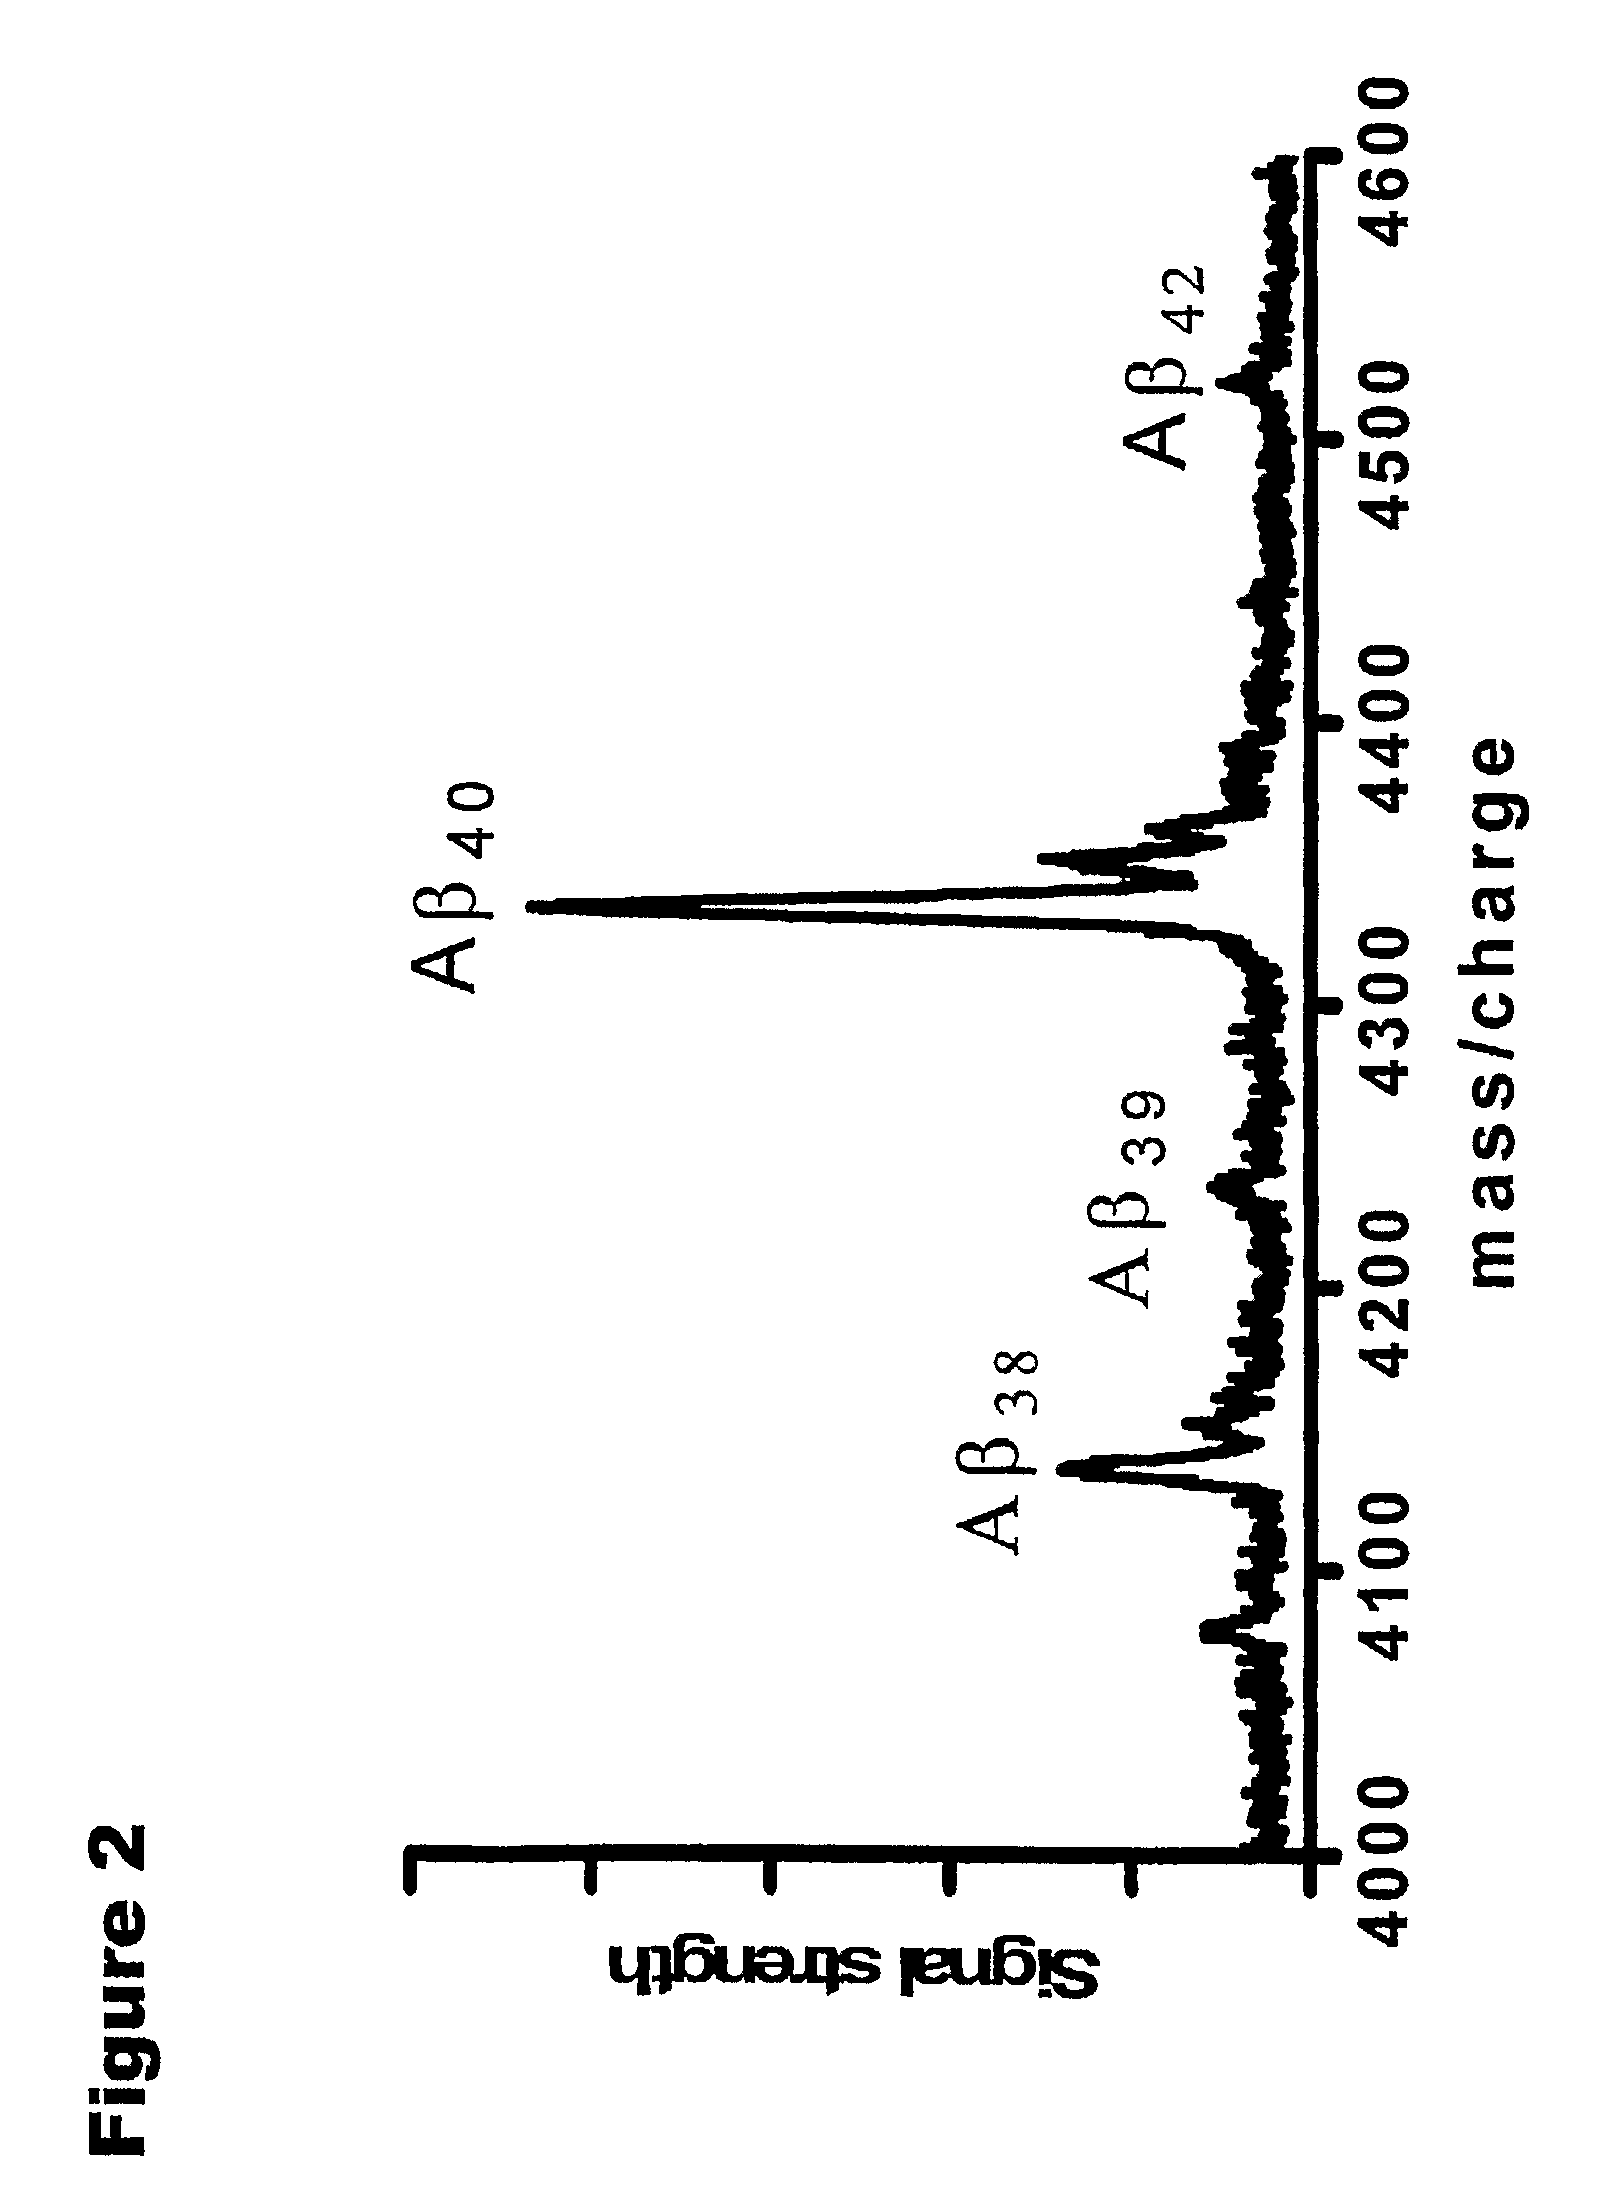 Methods for measuring the metabolism of neurally dervied biomolecules in vivo